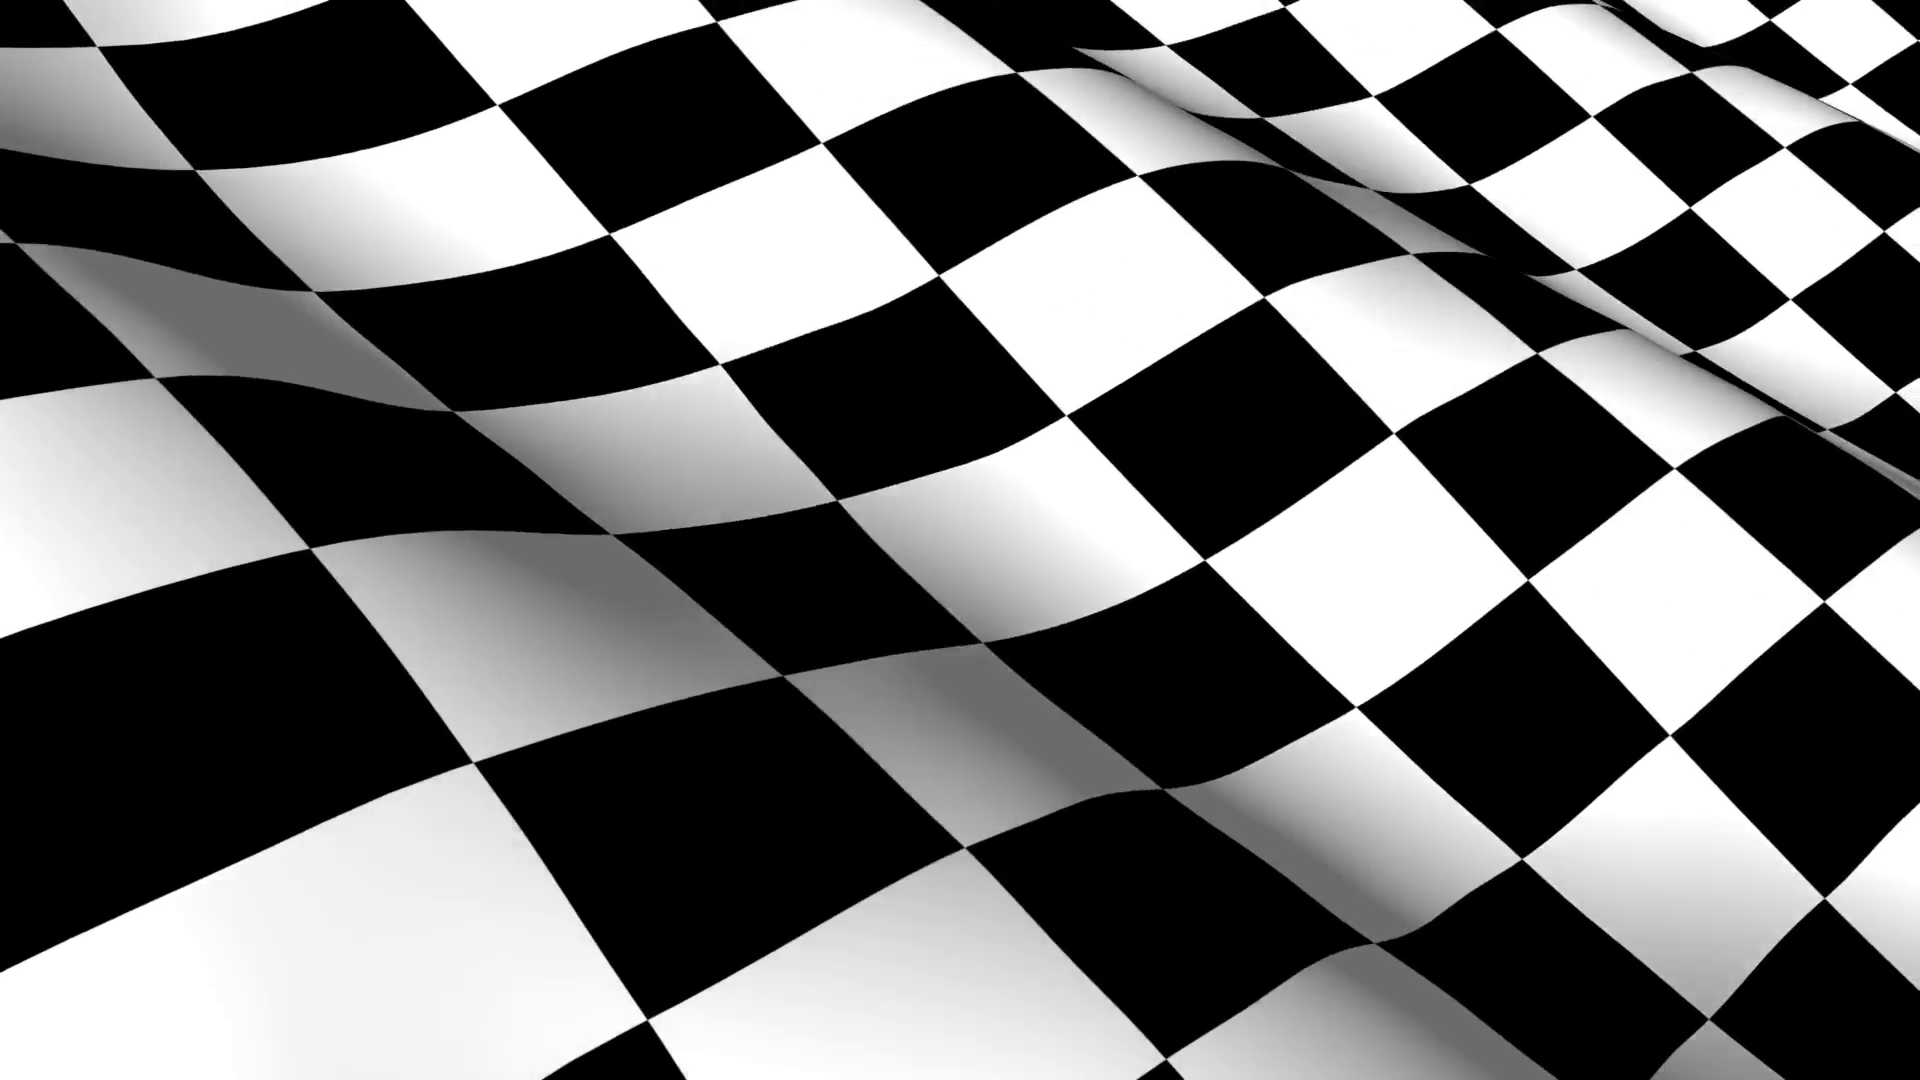 download checkered flag racing